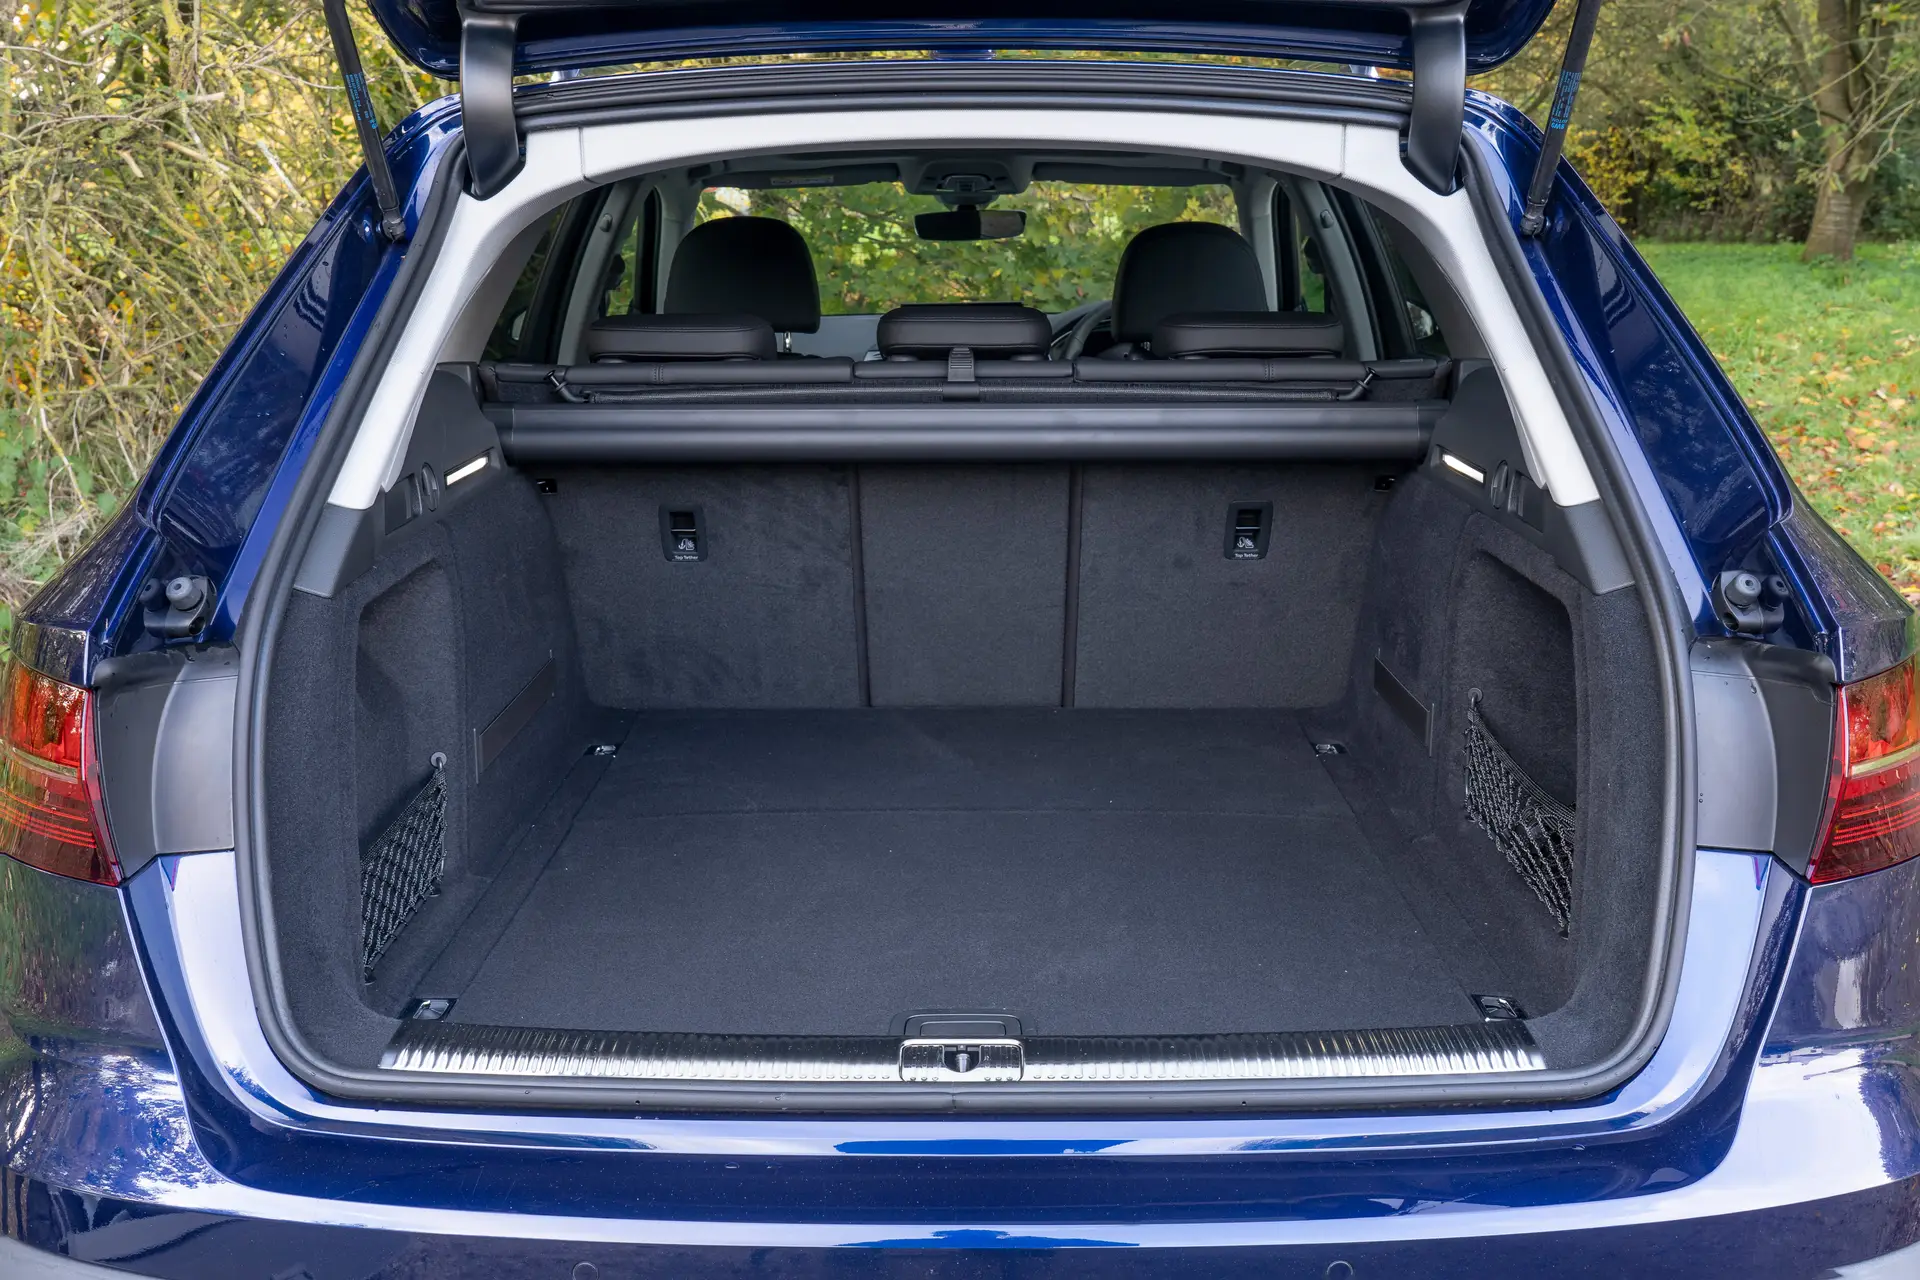 Audi A4 Allroad Review 2023: interior close up photo of the Audi A4 Allroad boot space